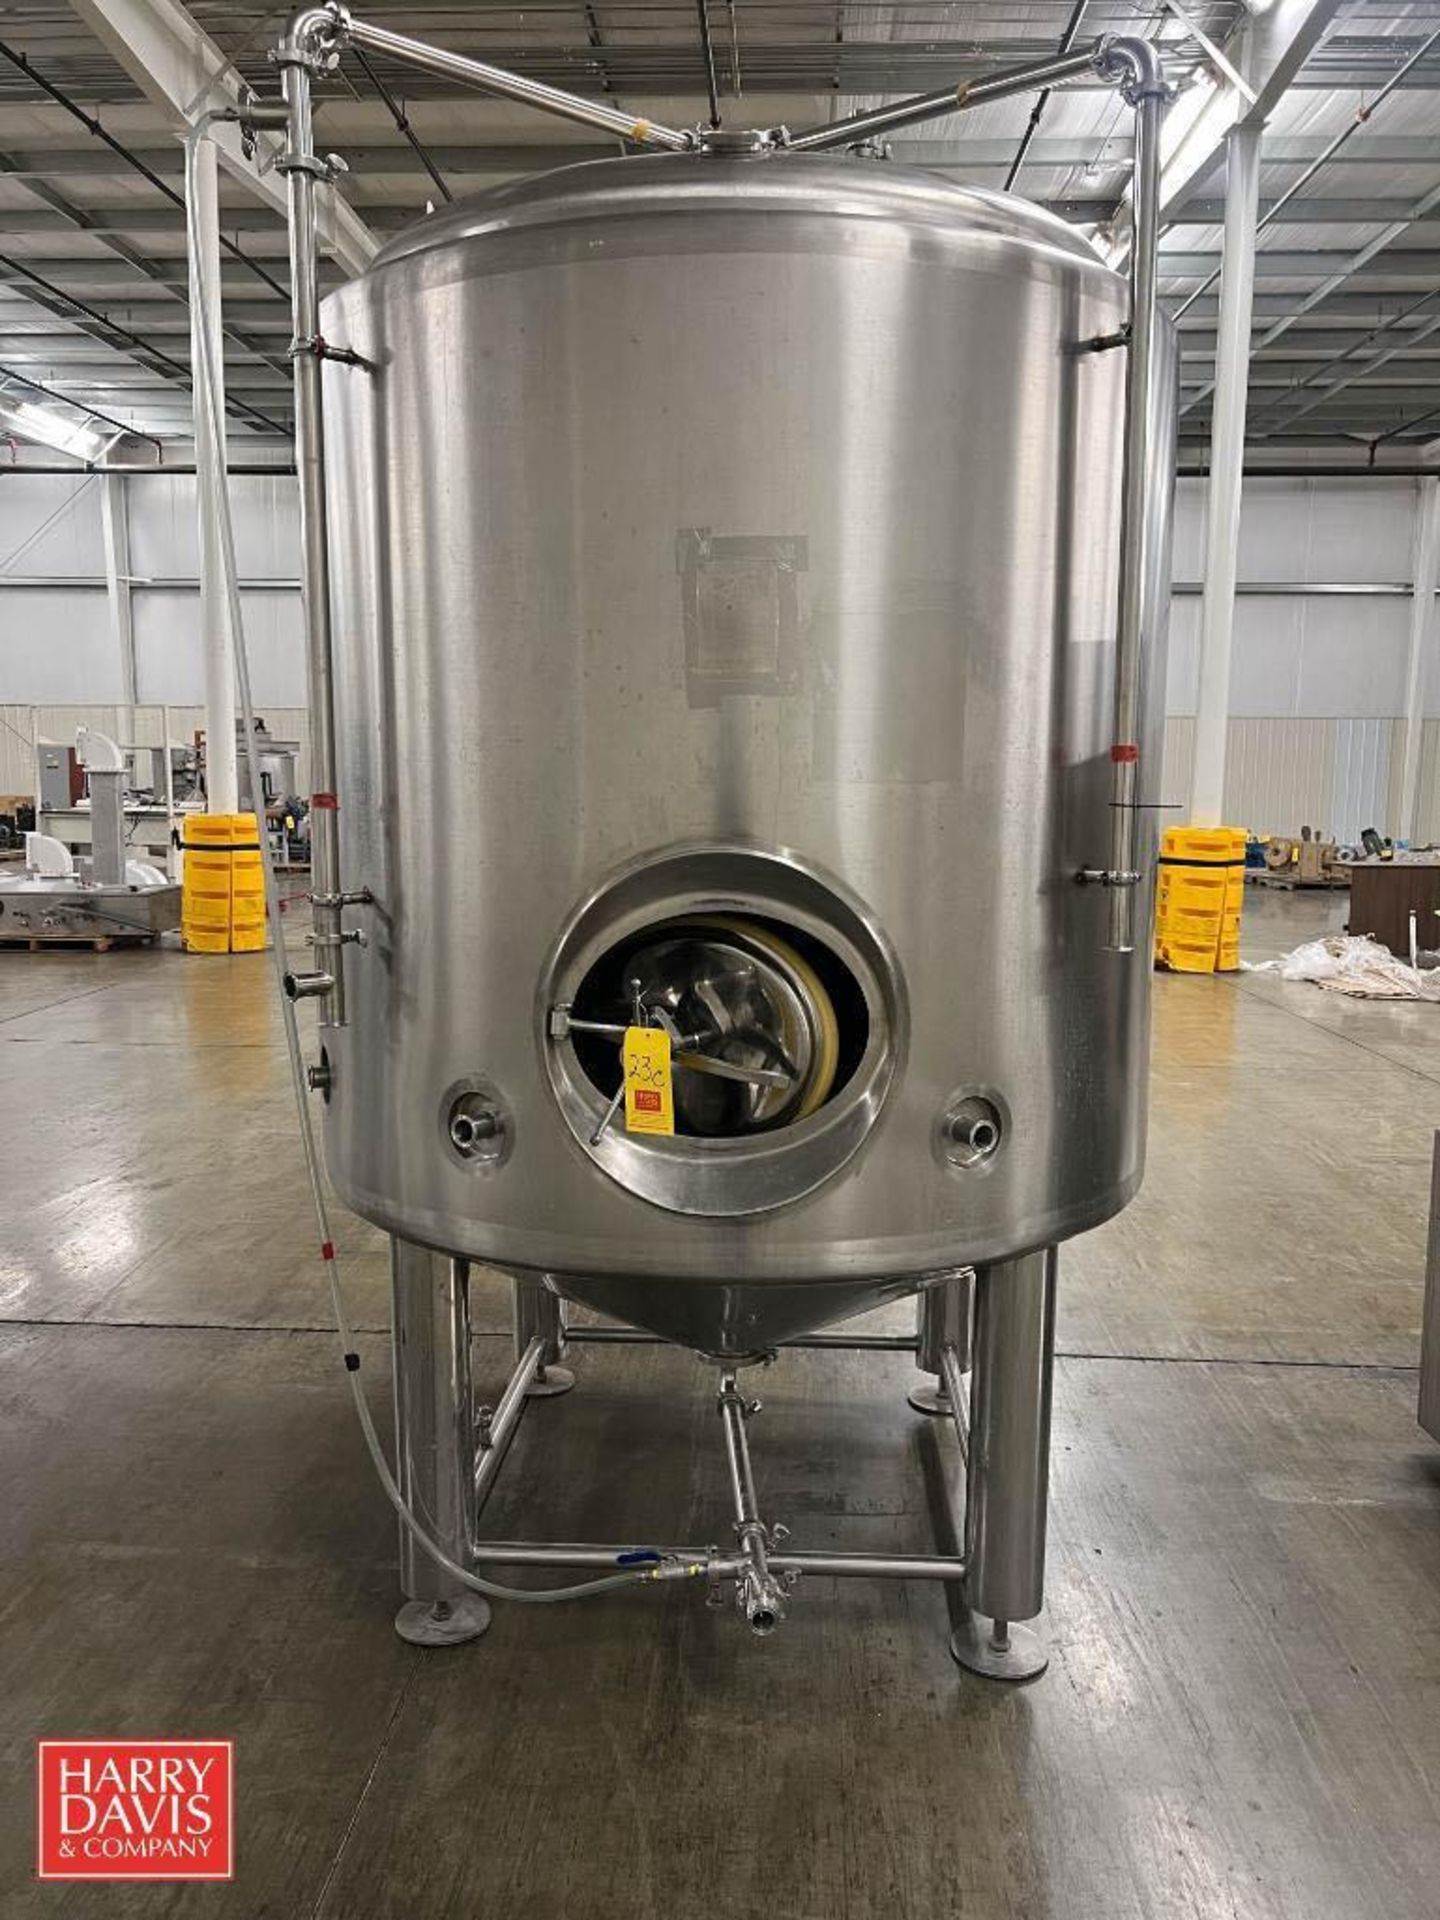 722 Gallon S/S Jacketed Tank - Rigging Fee: $750